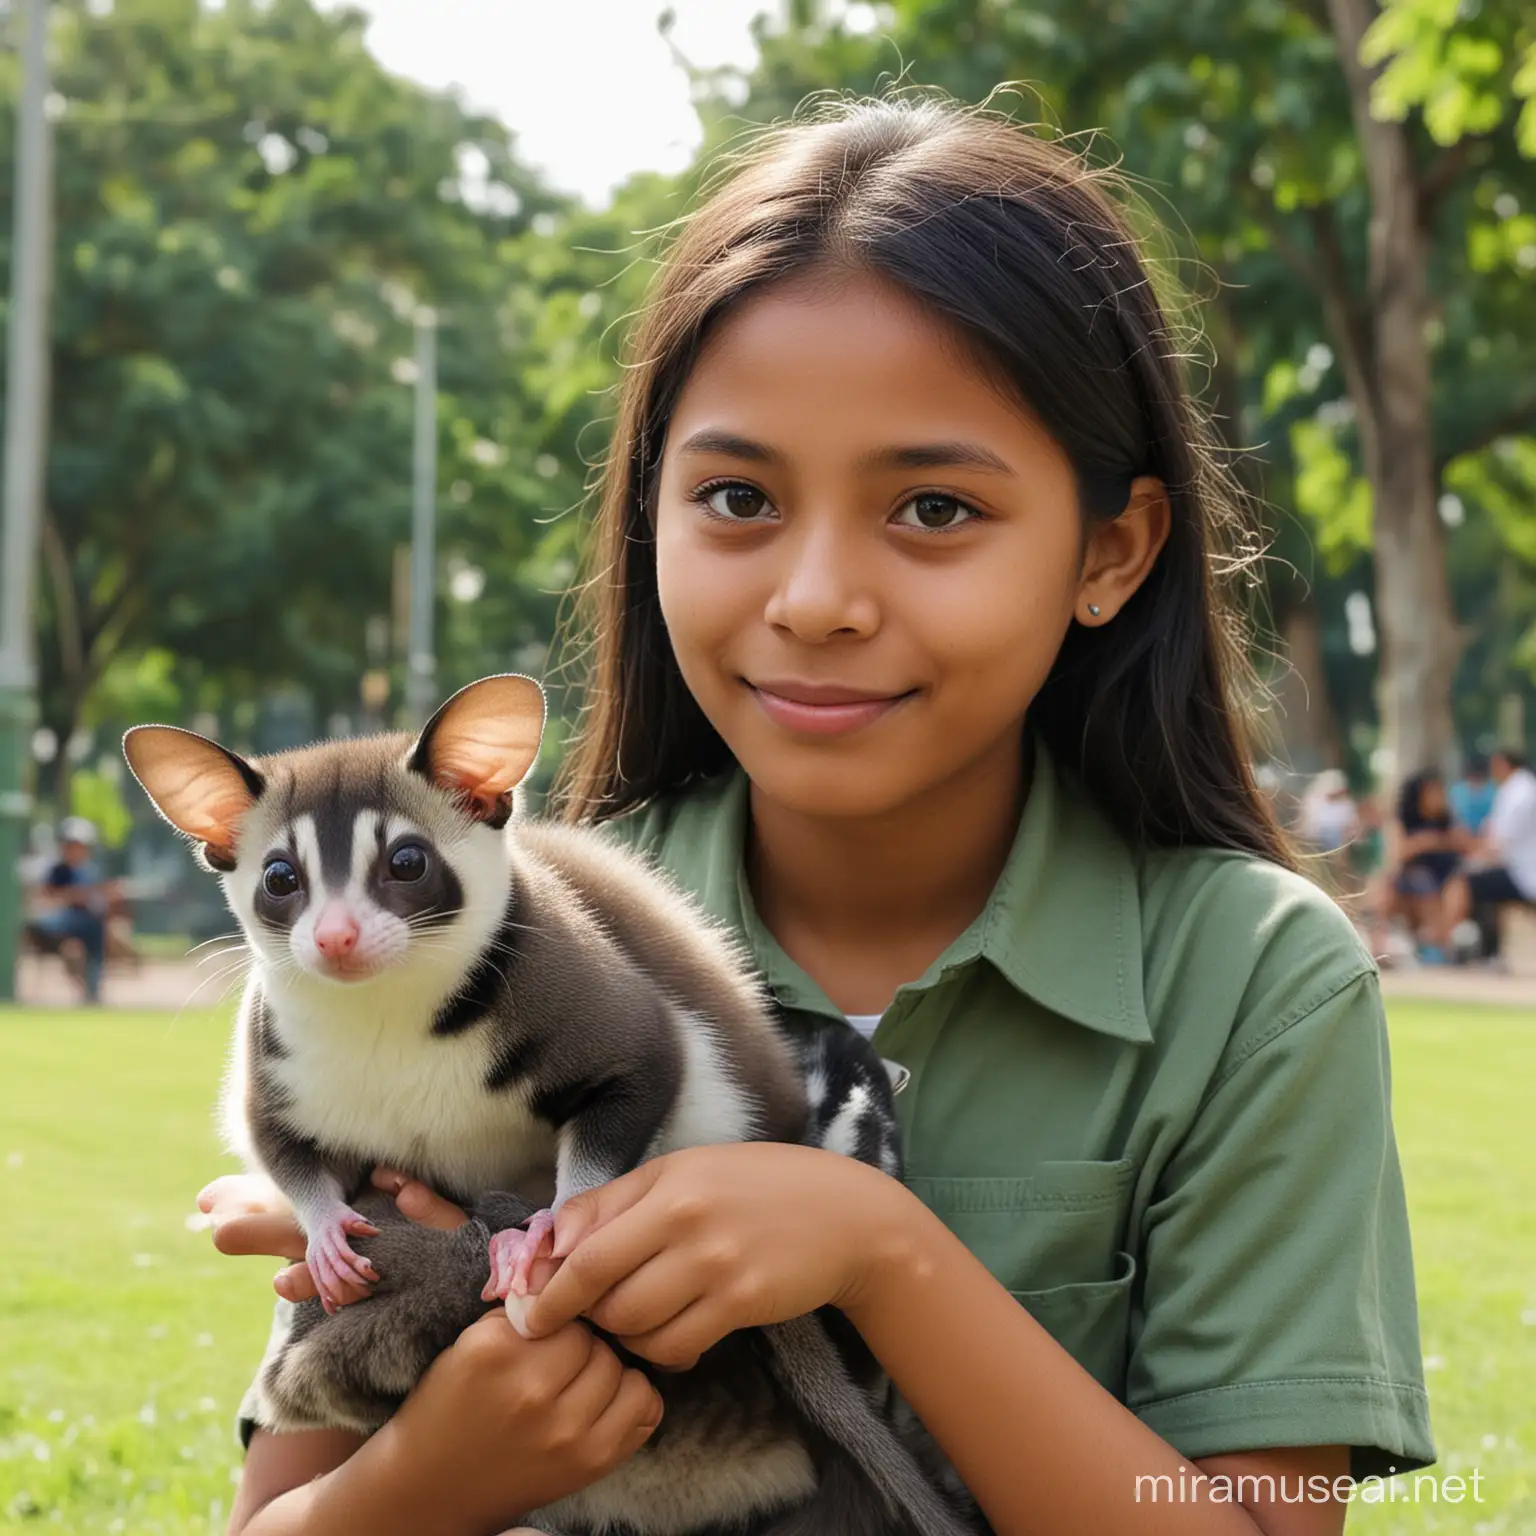 Young Indonesian Girl Bonding with Pet Sugar Glider in Park